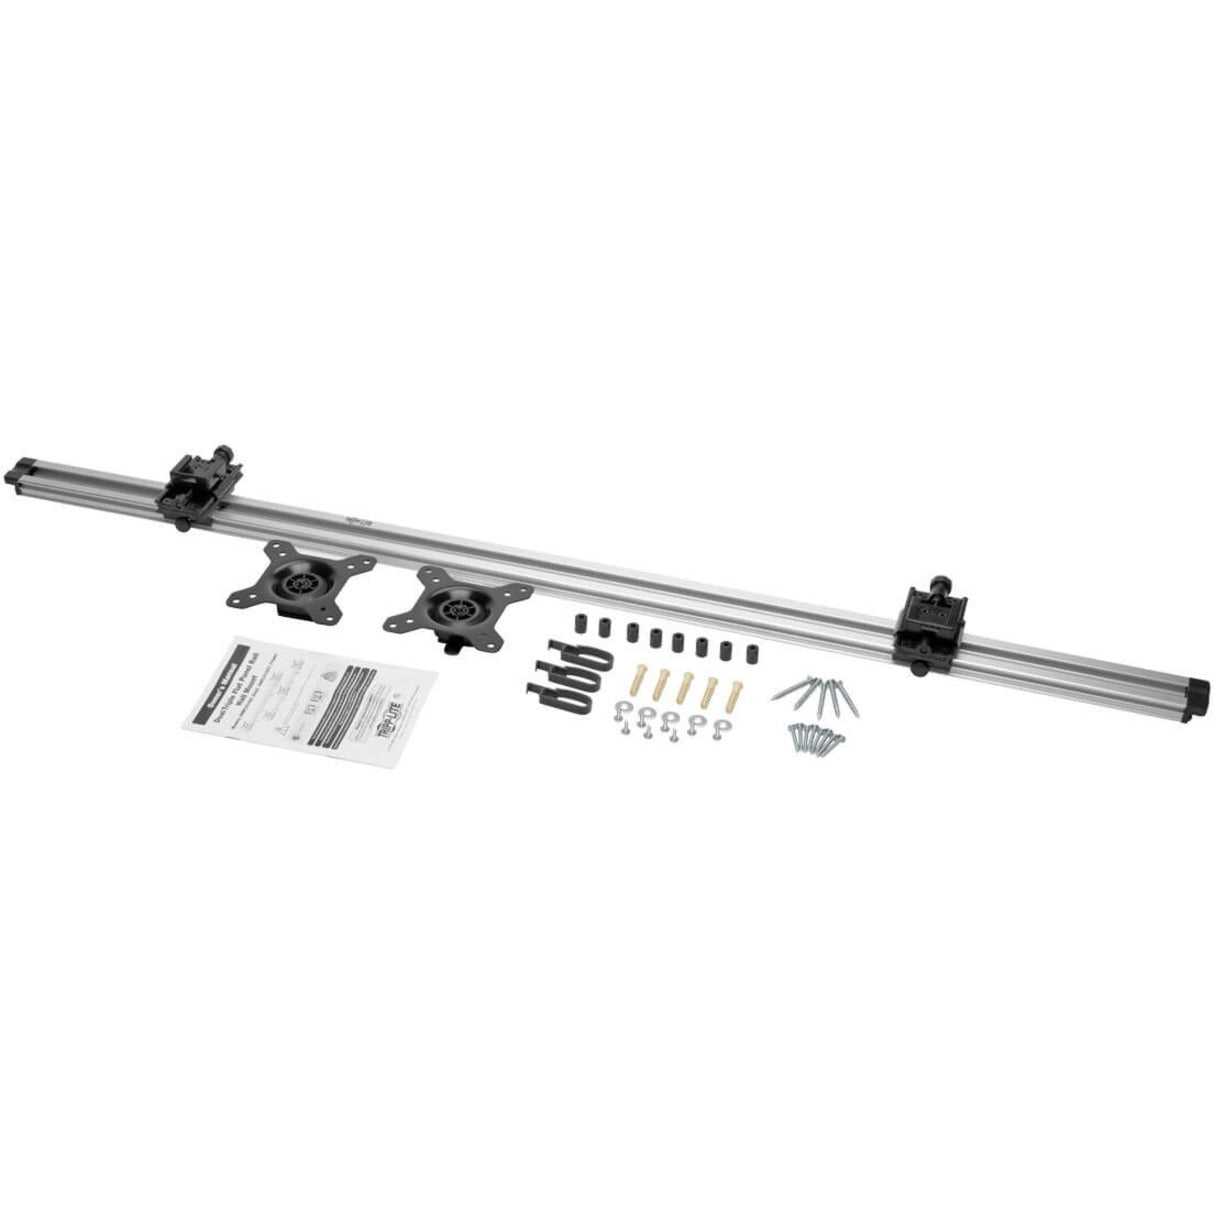 Tripp Lite DMR1024X2 Dual Flat-Panel Rail Wall Mount for 10" to 24" TVs and Monitors, Silver, 36 lb Maximum Load Capacity